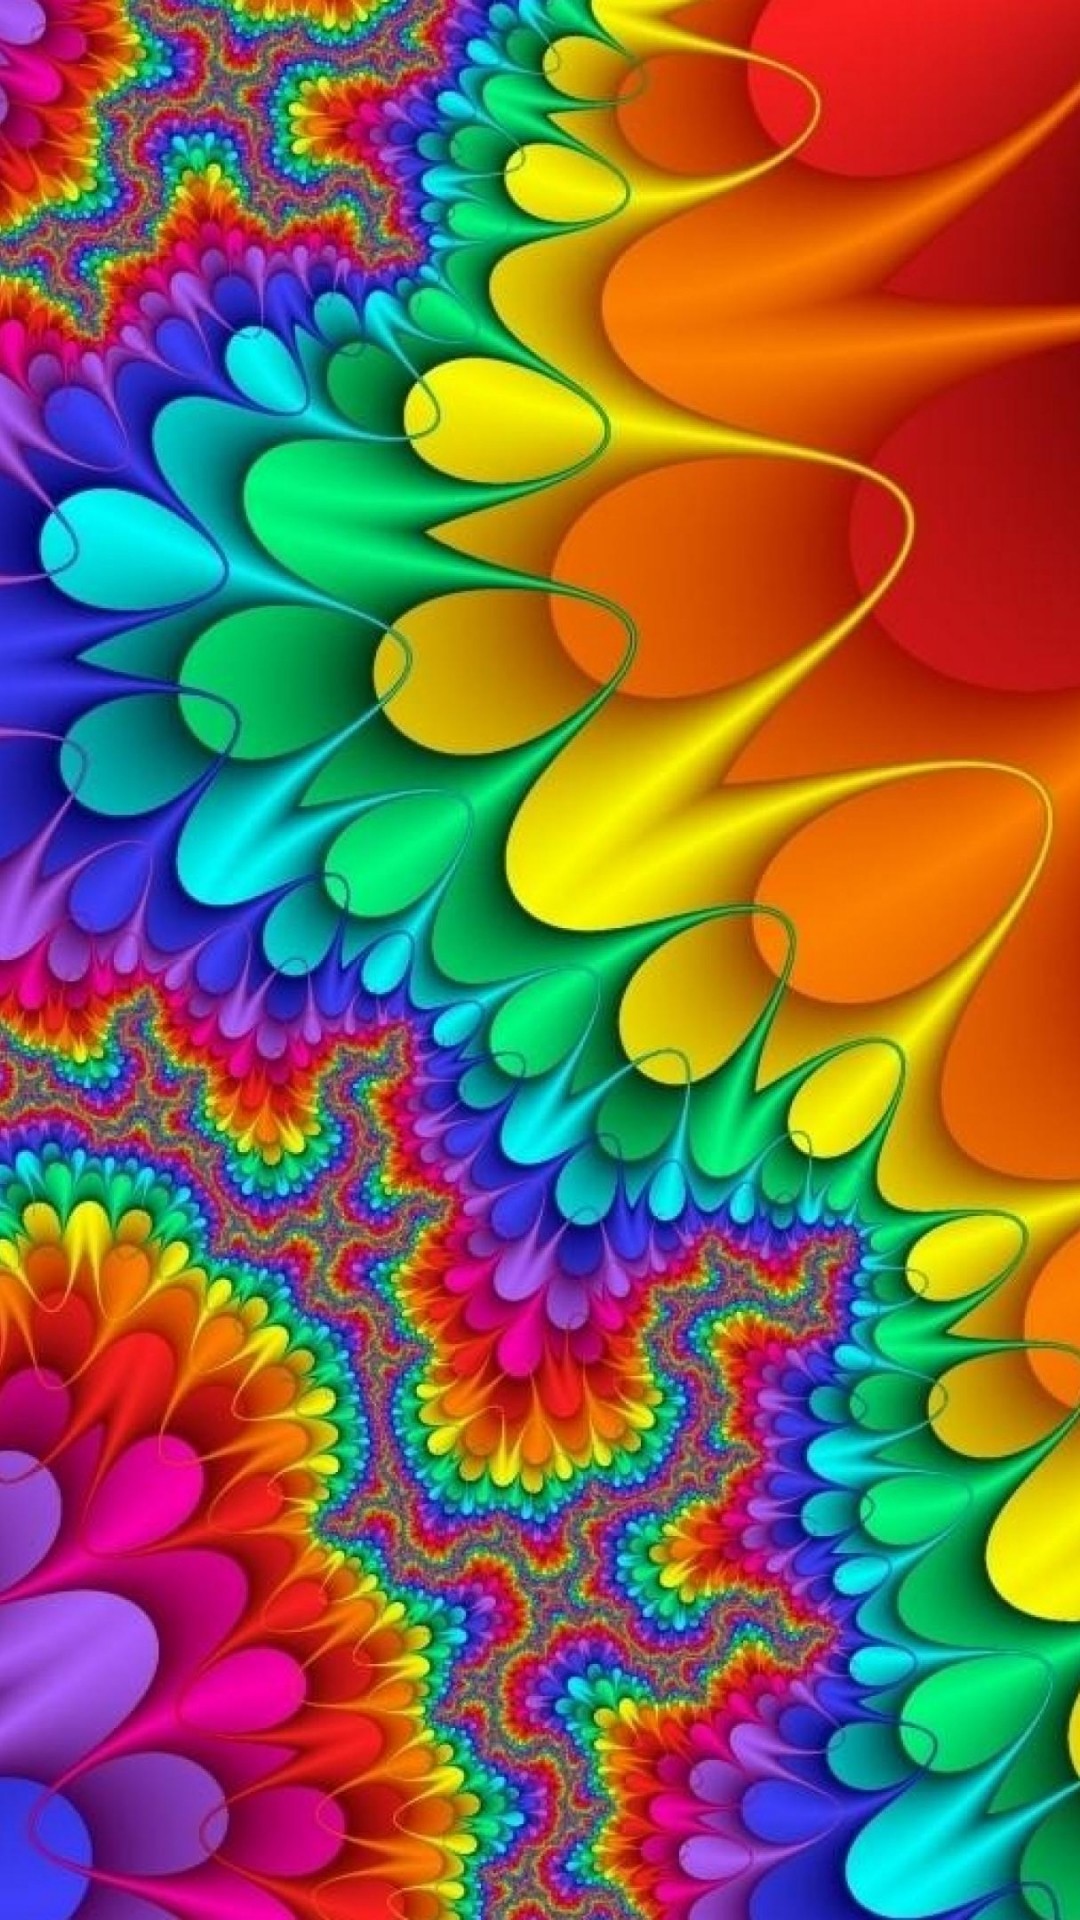 wallpaper wallpapers iphone colourful  Abstract Colorful wallpaper  Abstract wallpaper